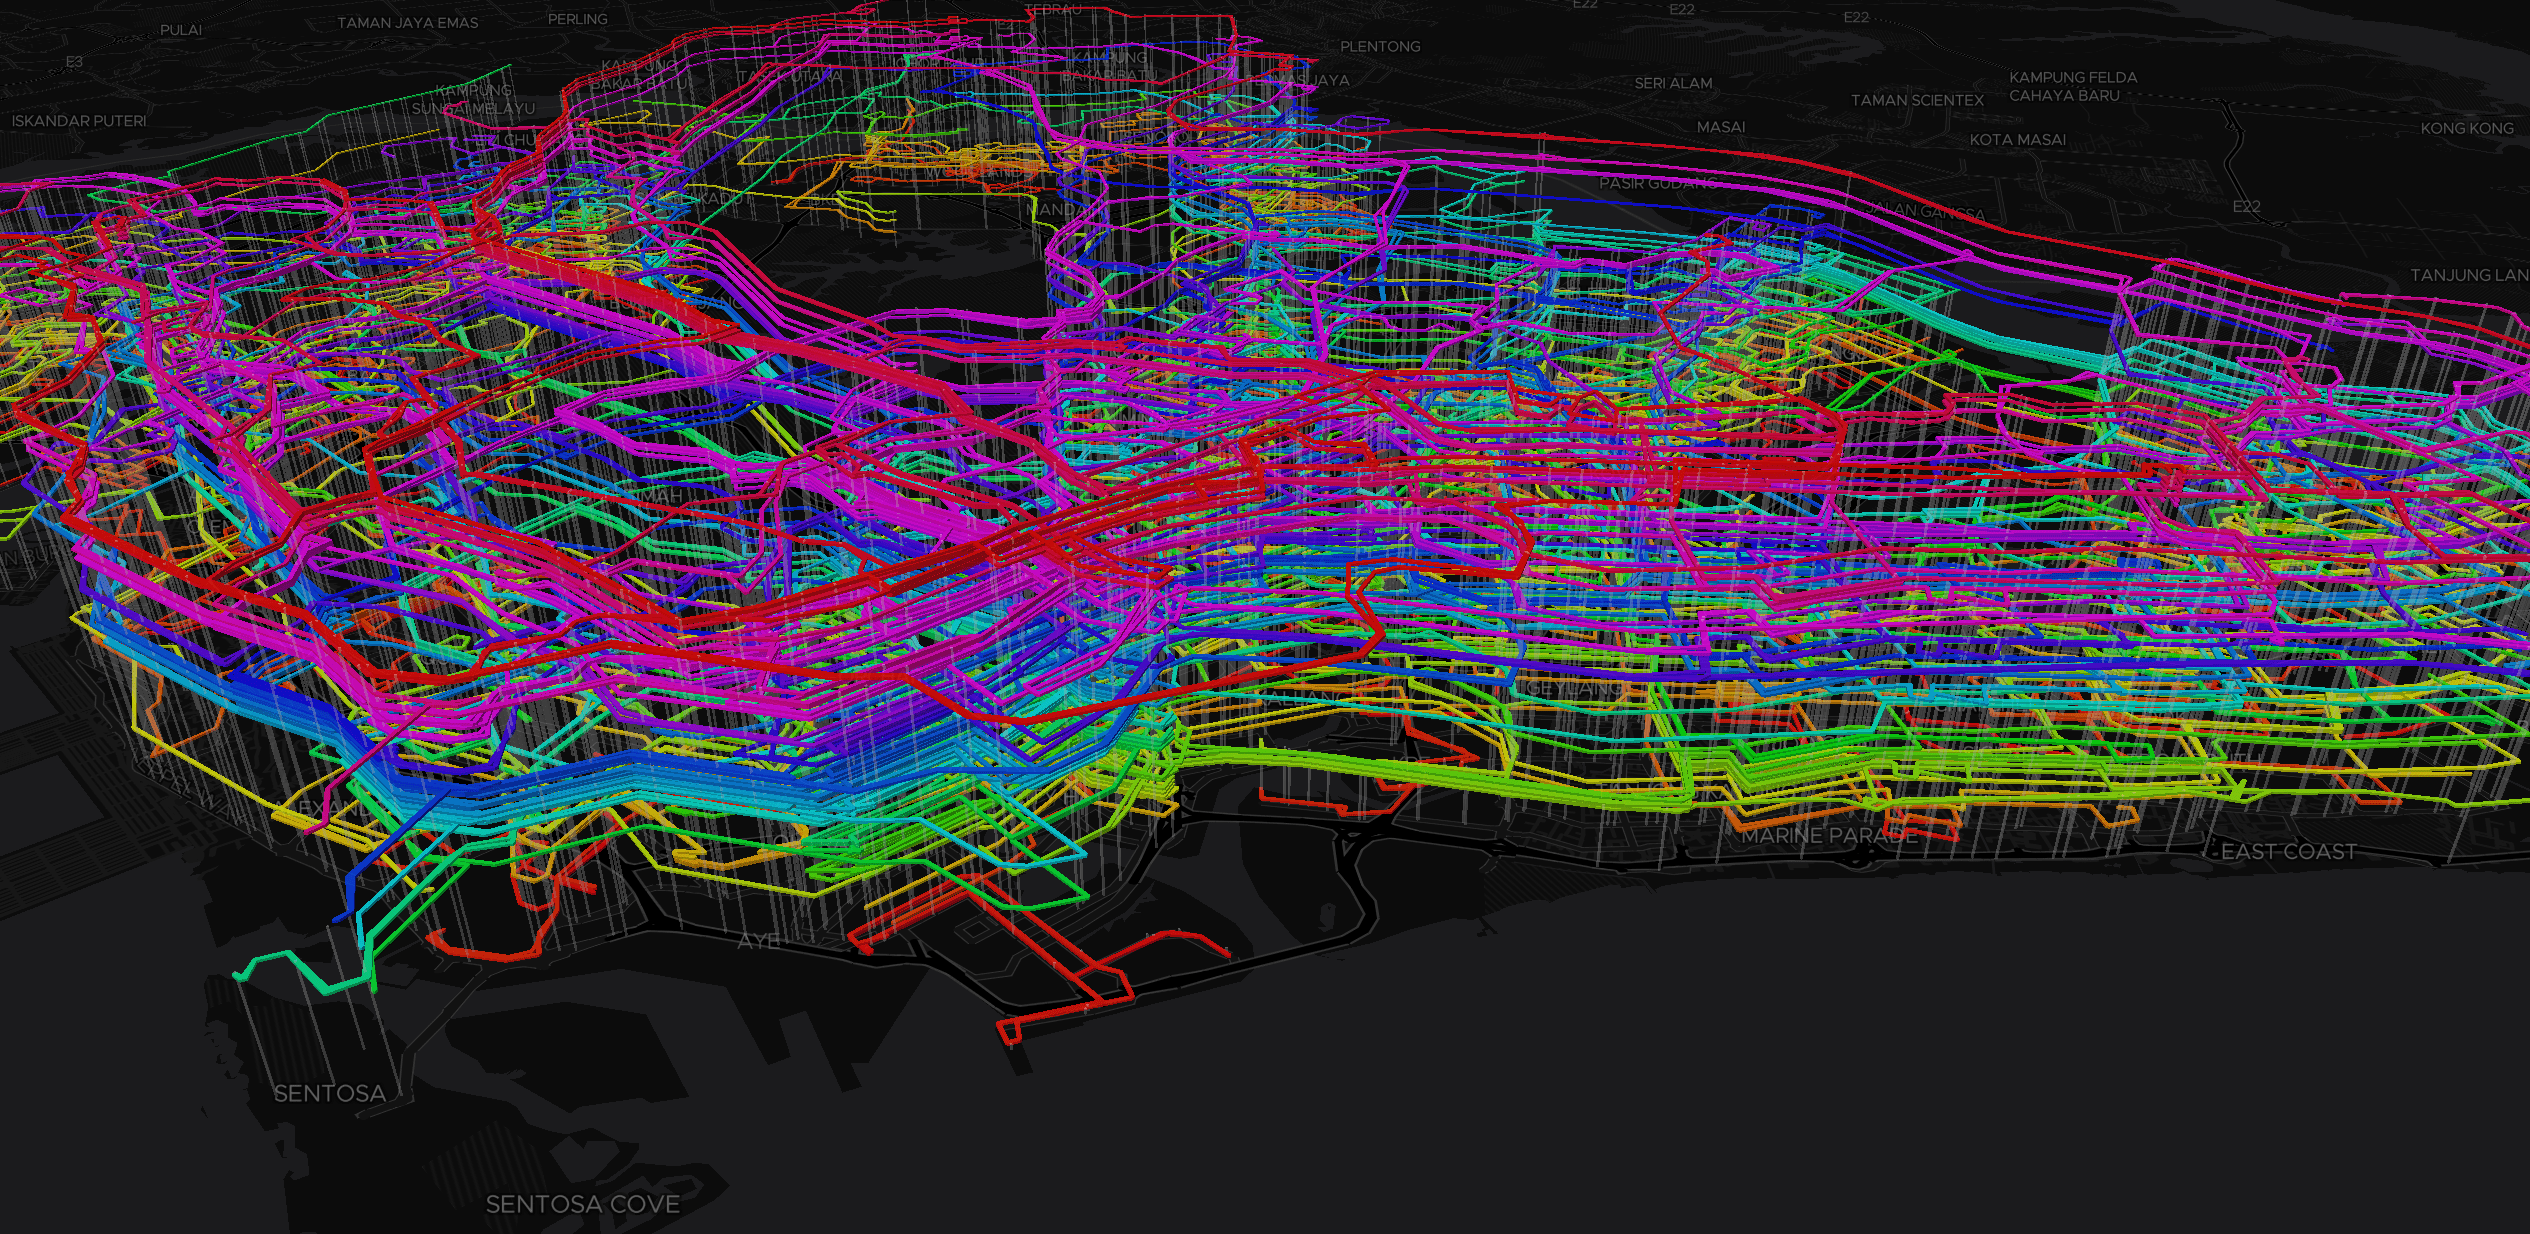 BusRouter SG visualization, showing extruded 3D route lines with rainbow colors